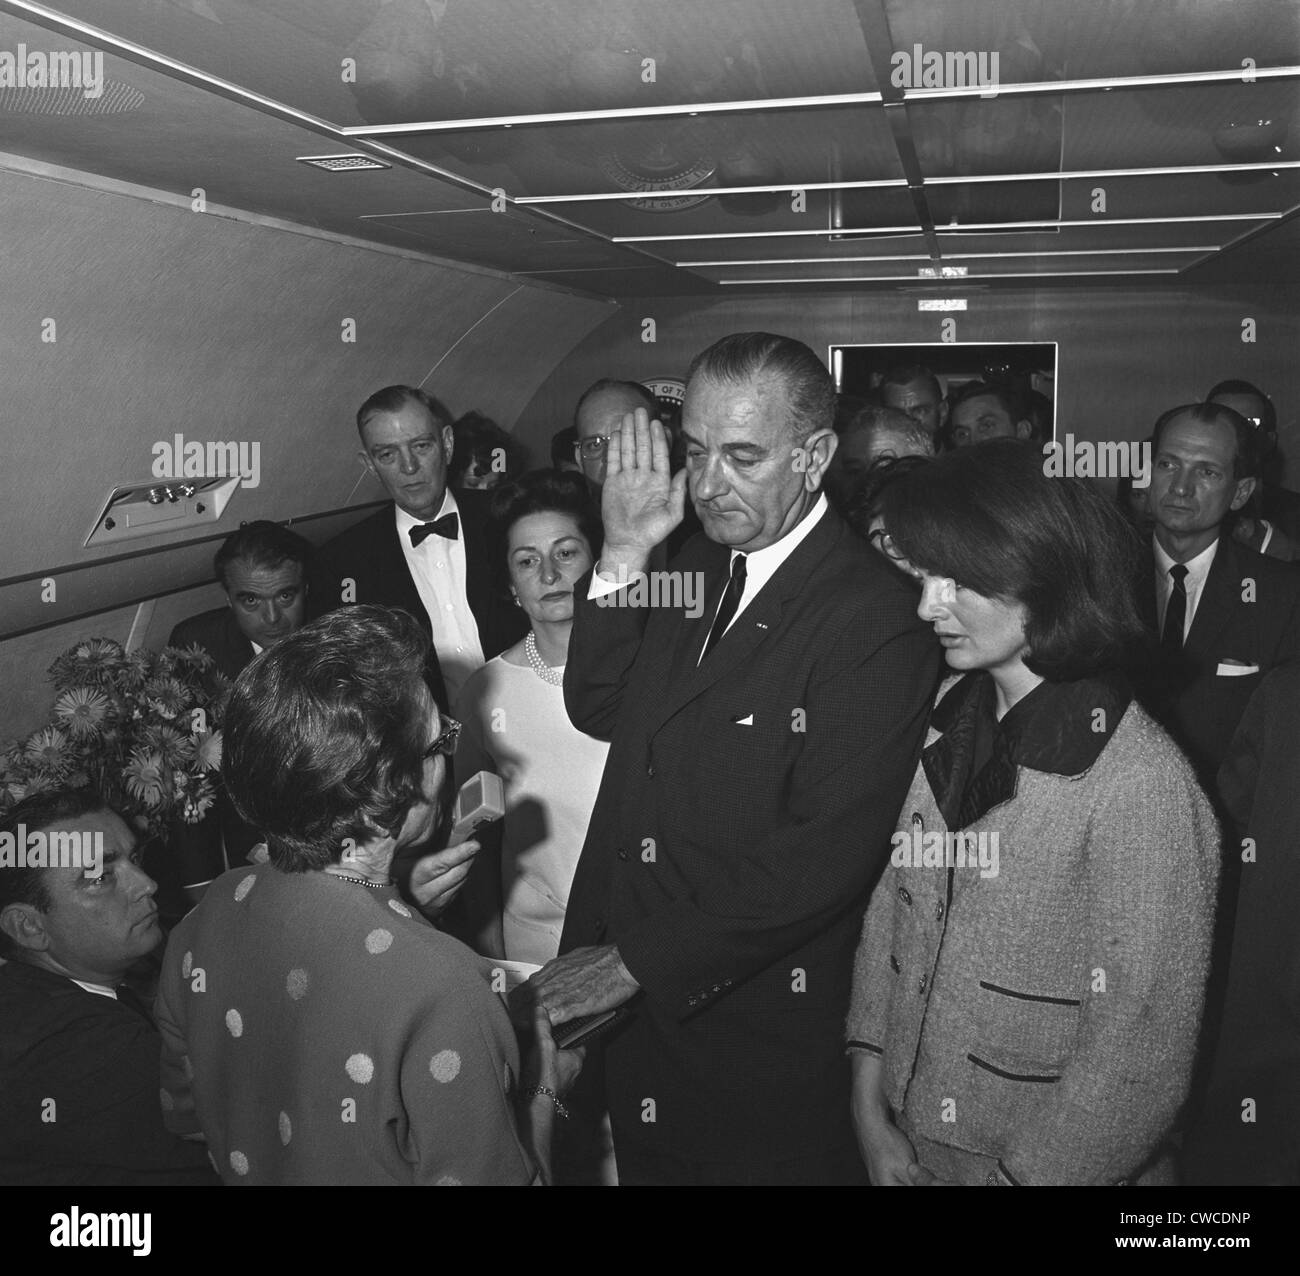 Lyndon Johnson takes the Oath of Office after Kennedy's assassination. This full frame high resolution digital image reveals Stock Photo